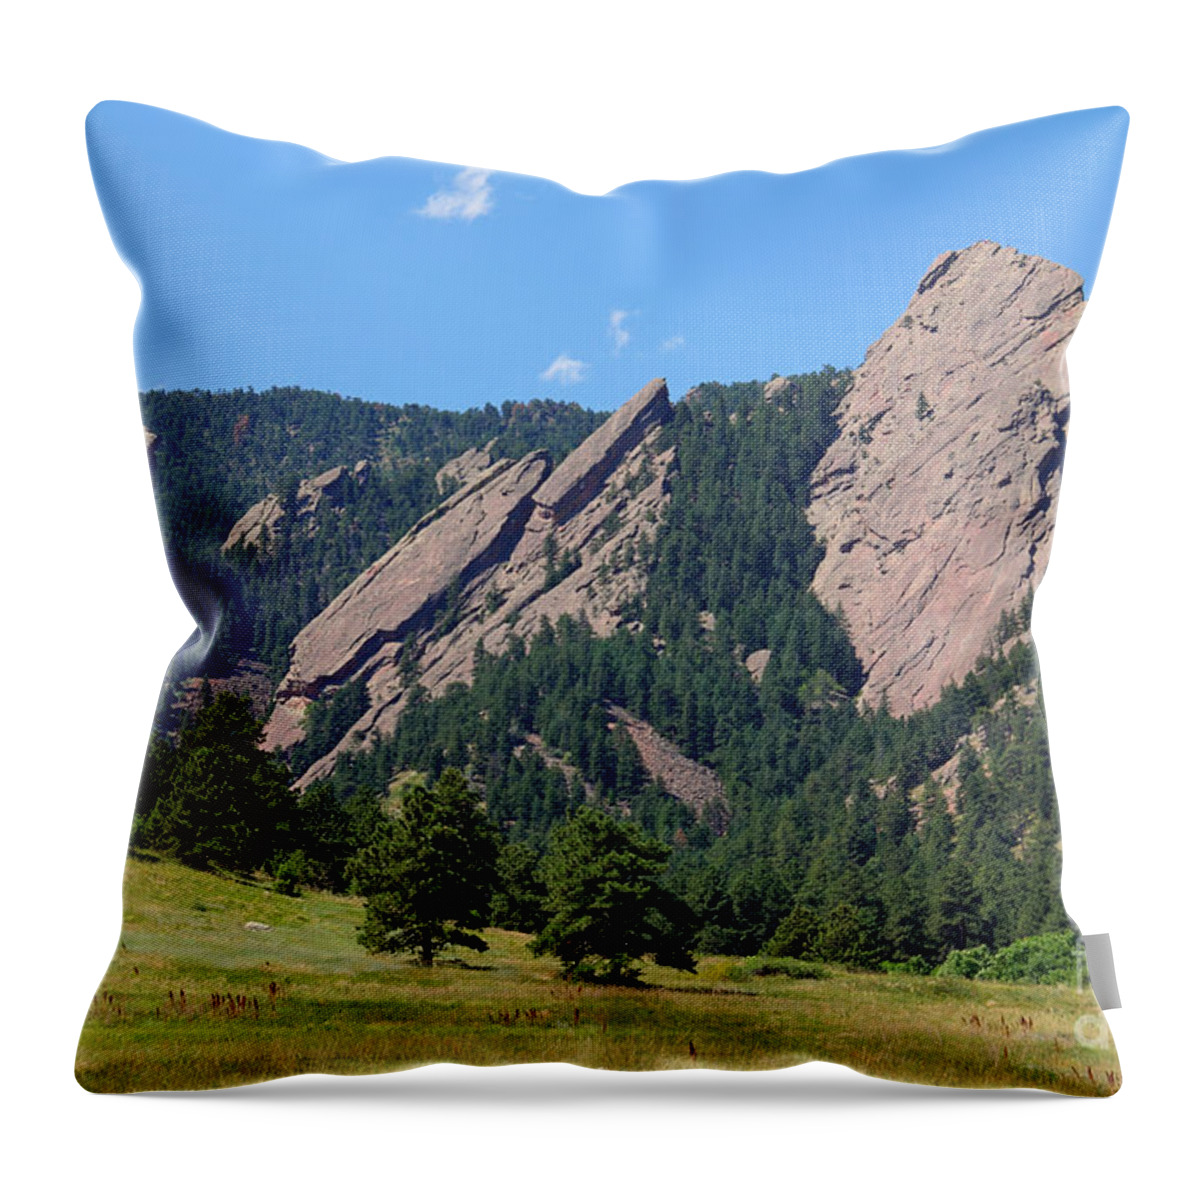 Colorado Throw Pillow featuring the photograph The Flatirons by Bob Hislop